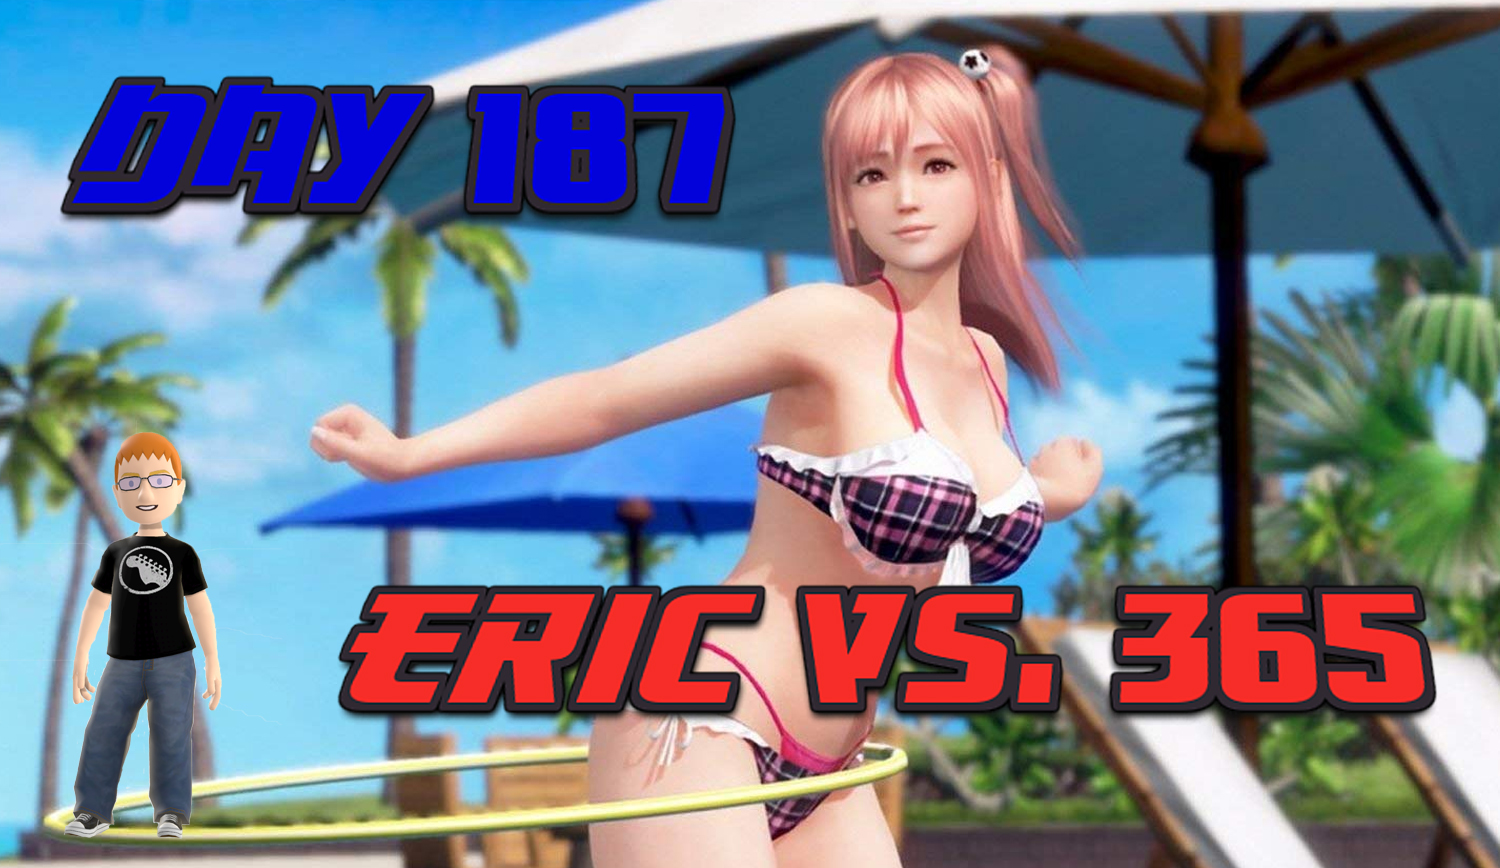 Eric Vs. 365 Day 187 Dead or Alive Xtreme 3 Scarlet